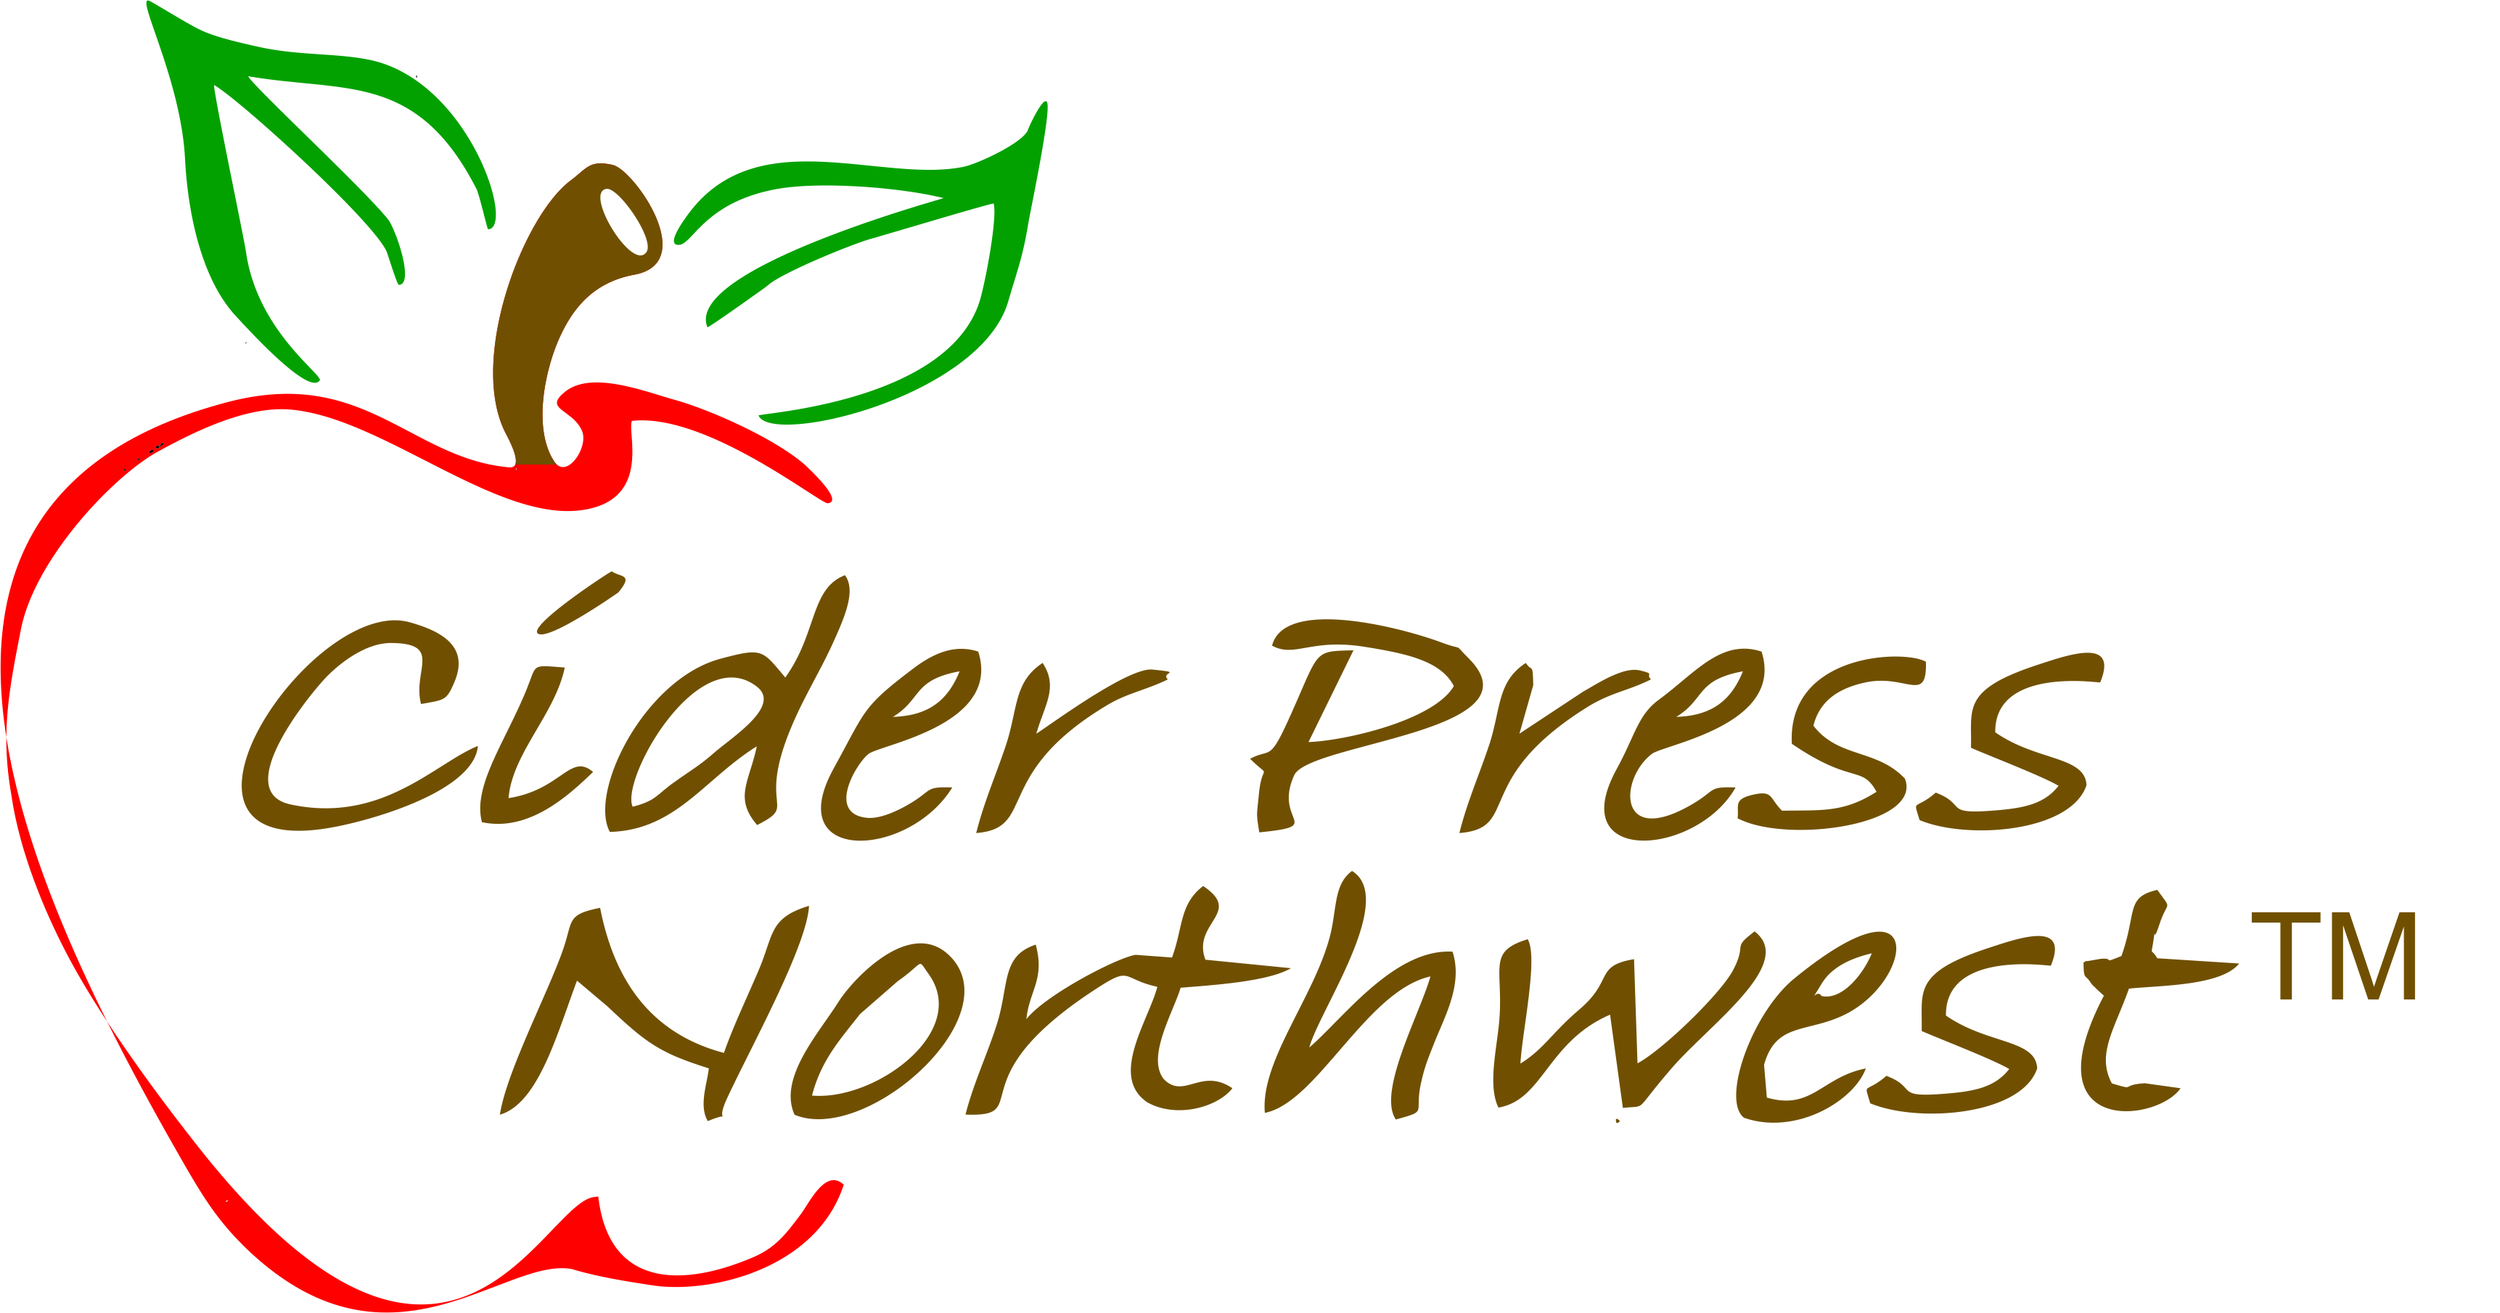 Cider Press Northwest | We rent and sell handcrafted portable and easy to store cider presses.  